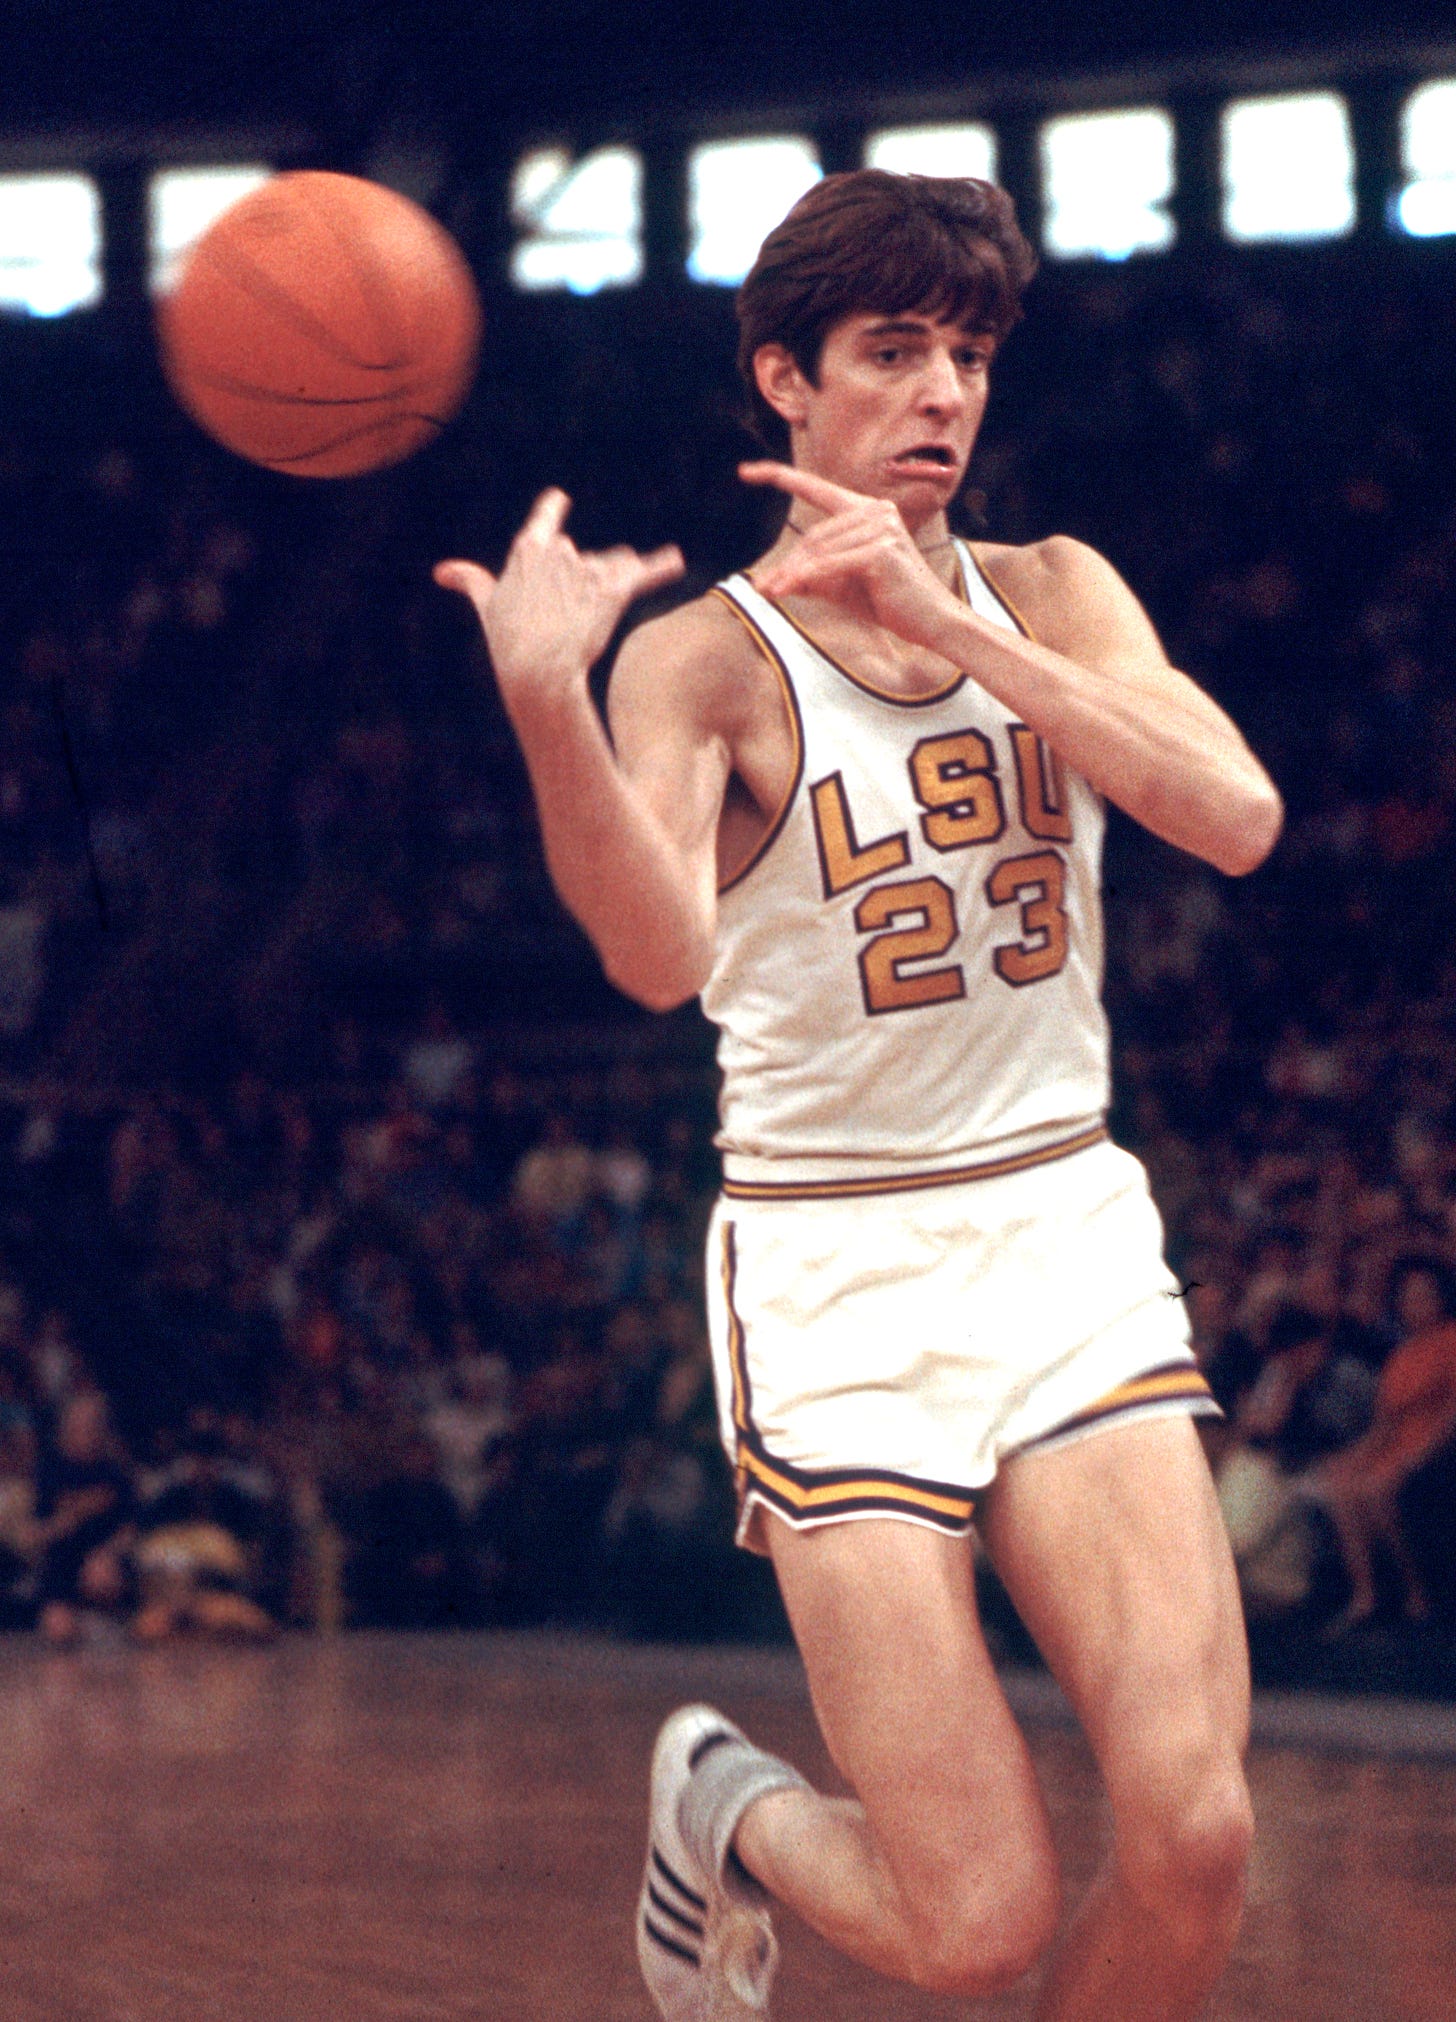 Remembering the other Pistol Pete